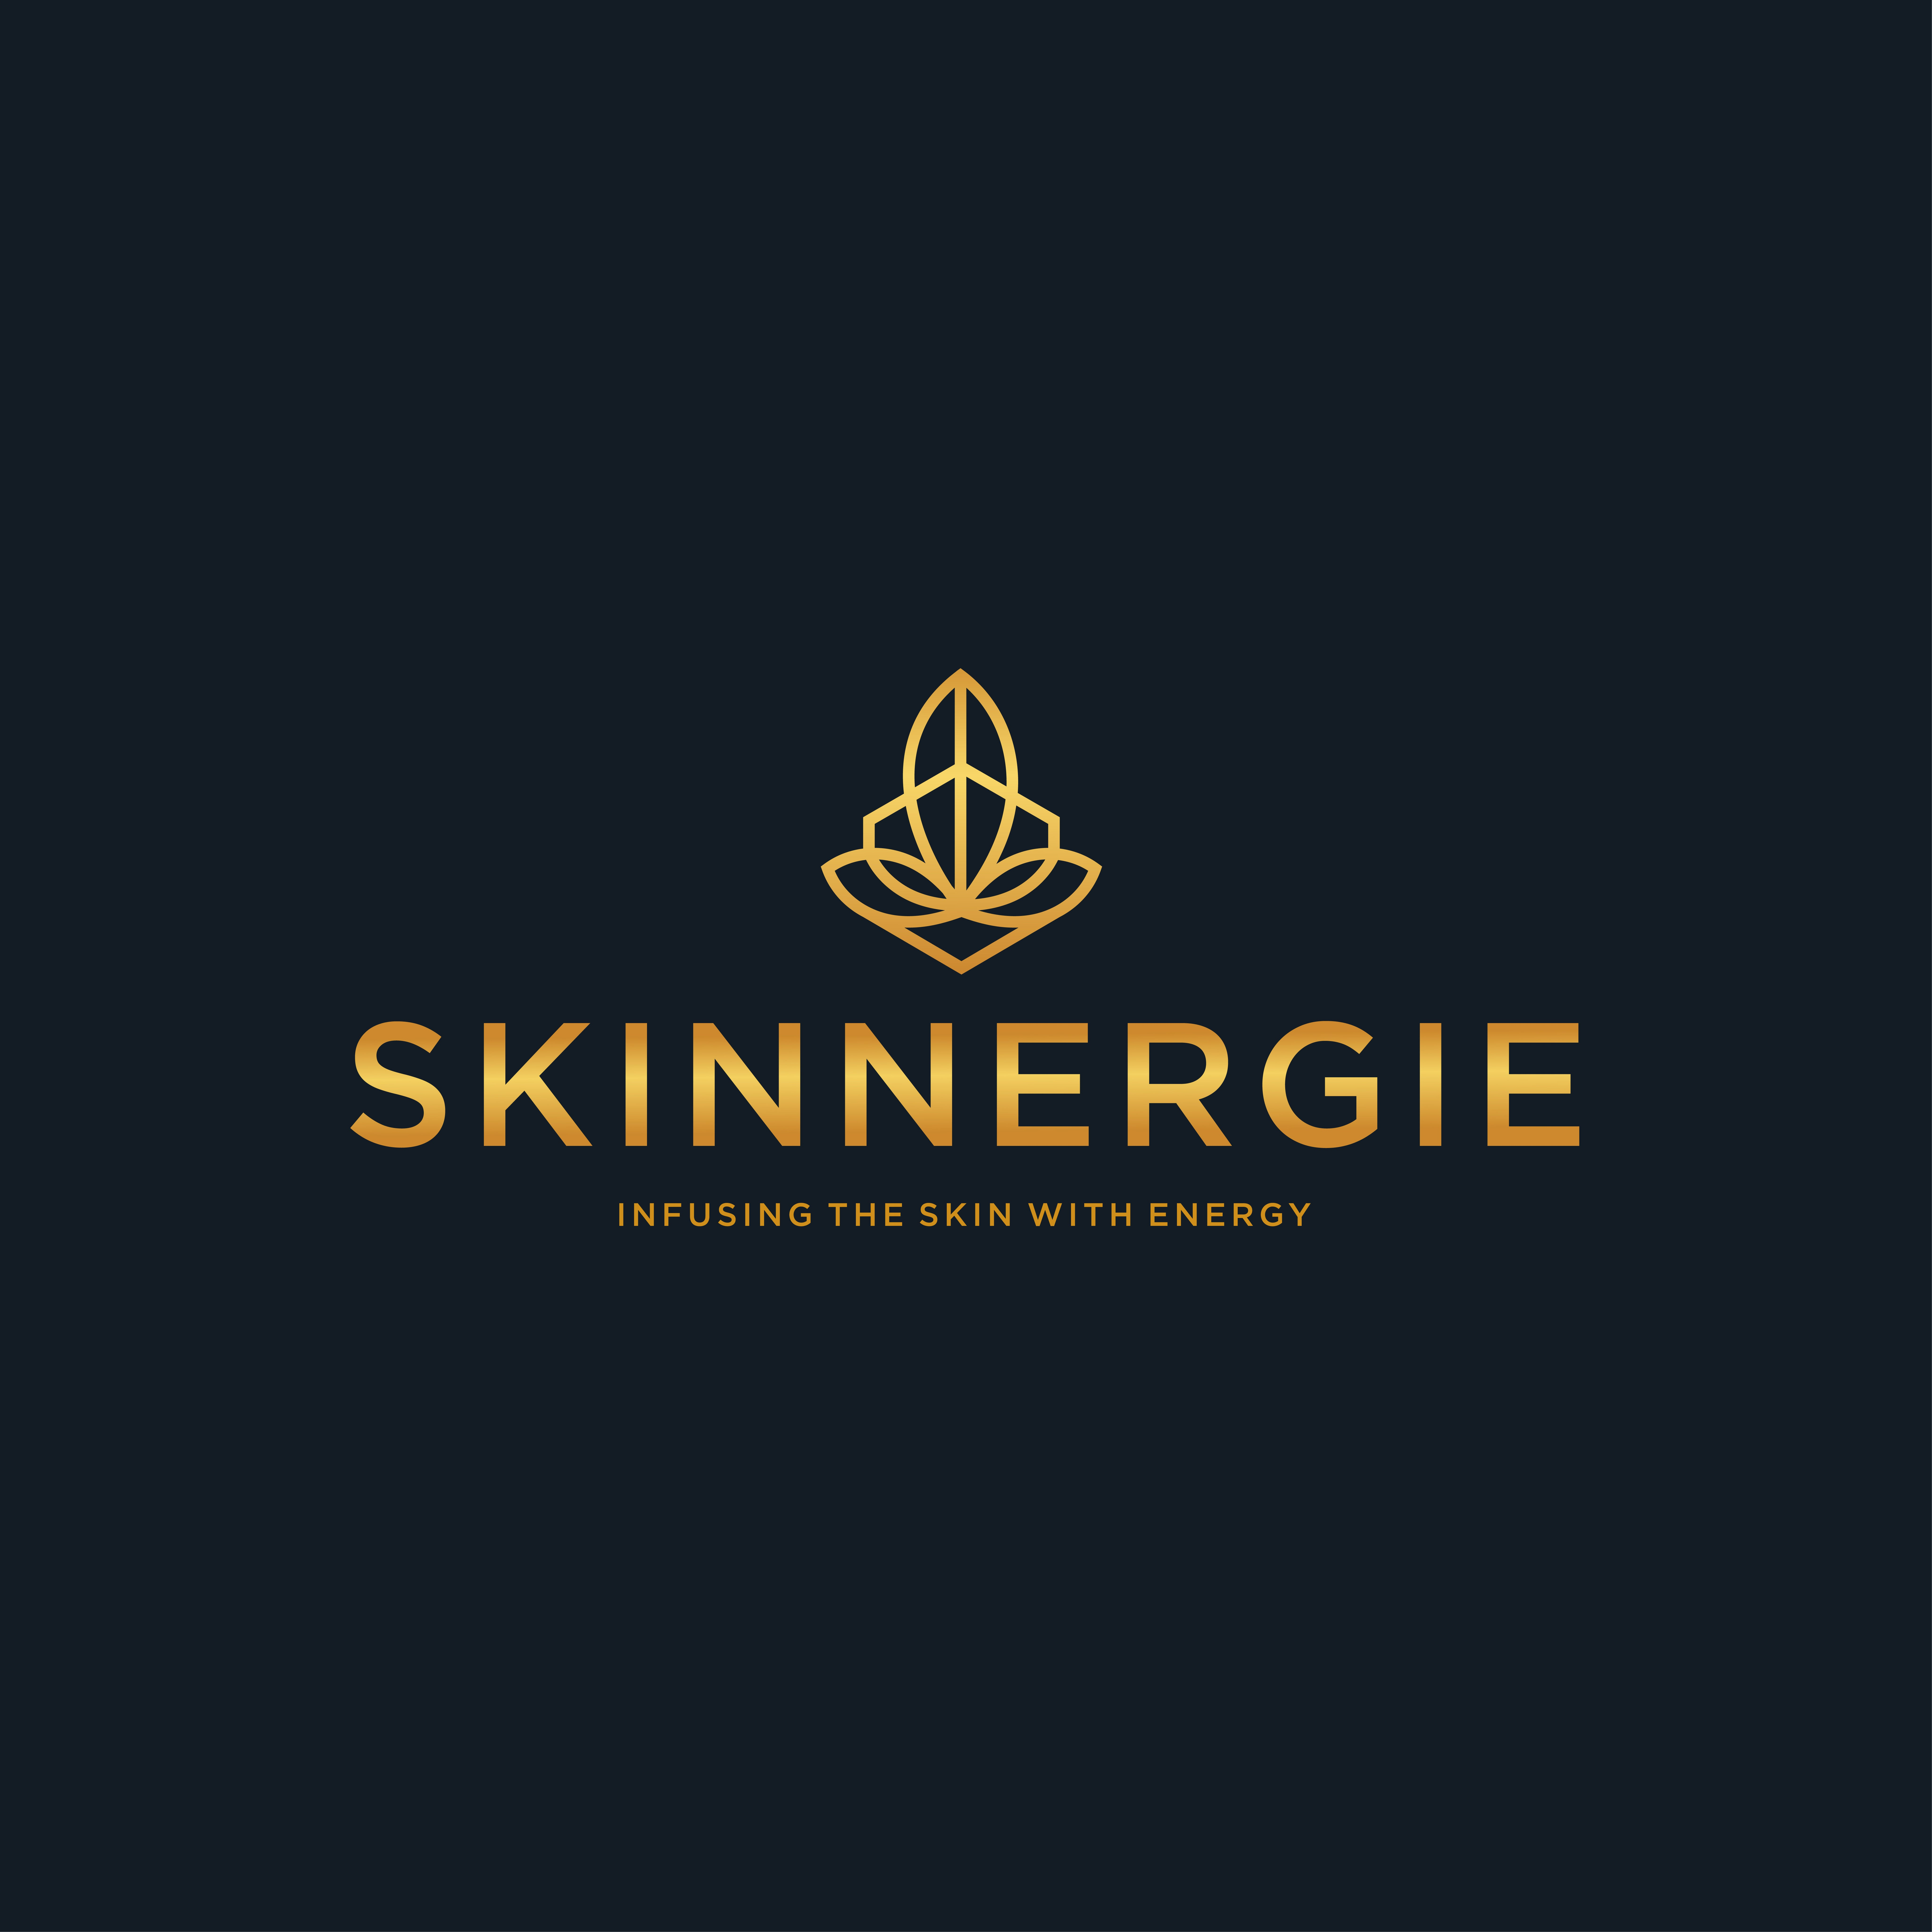 Skinnergie Skincare Set To Disrupt The Skincare Industry With Its Top Of The Line Natural Skincare Remedies